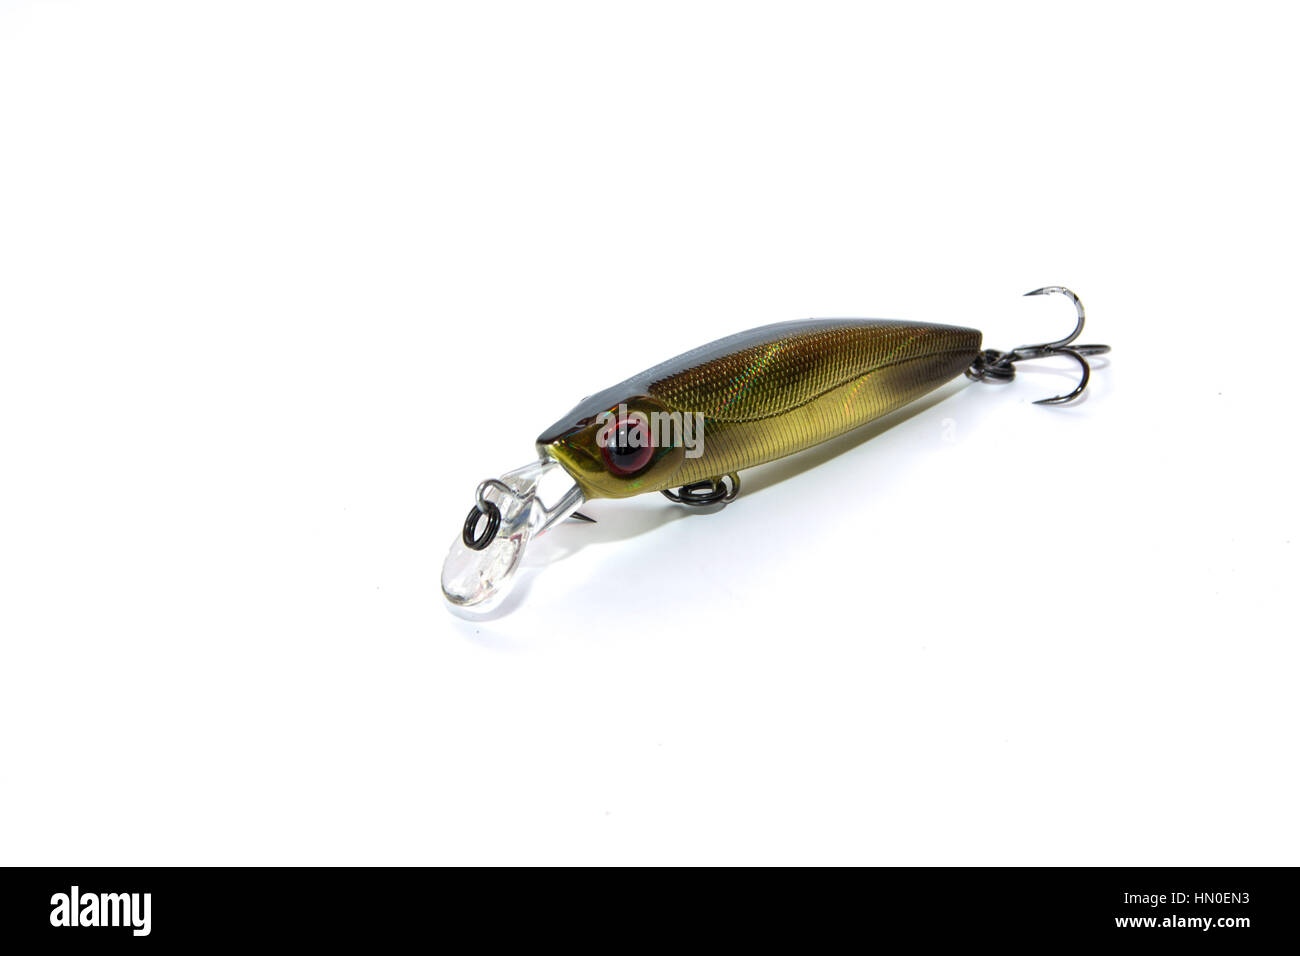 Bait for pike. Hard lures isoletor. Hard lures for fishing Stock